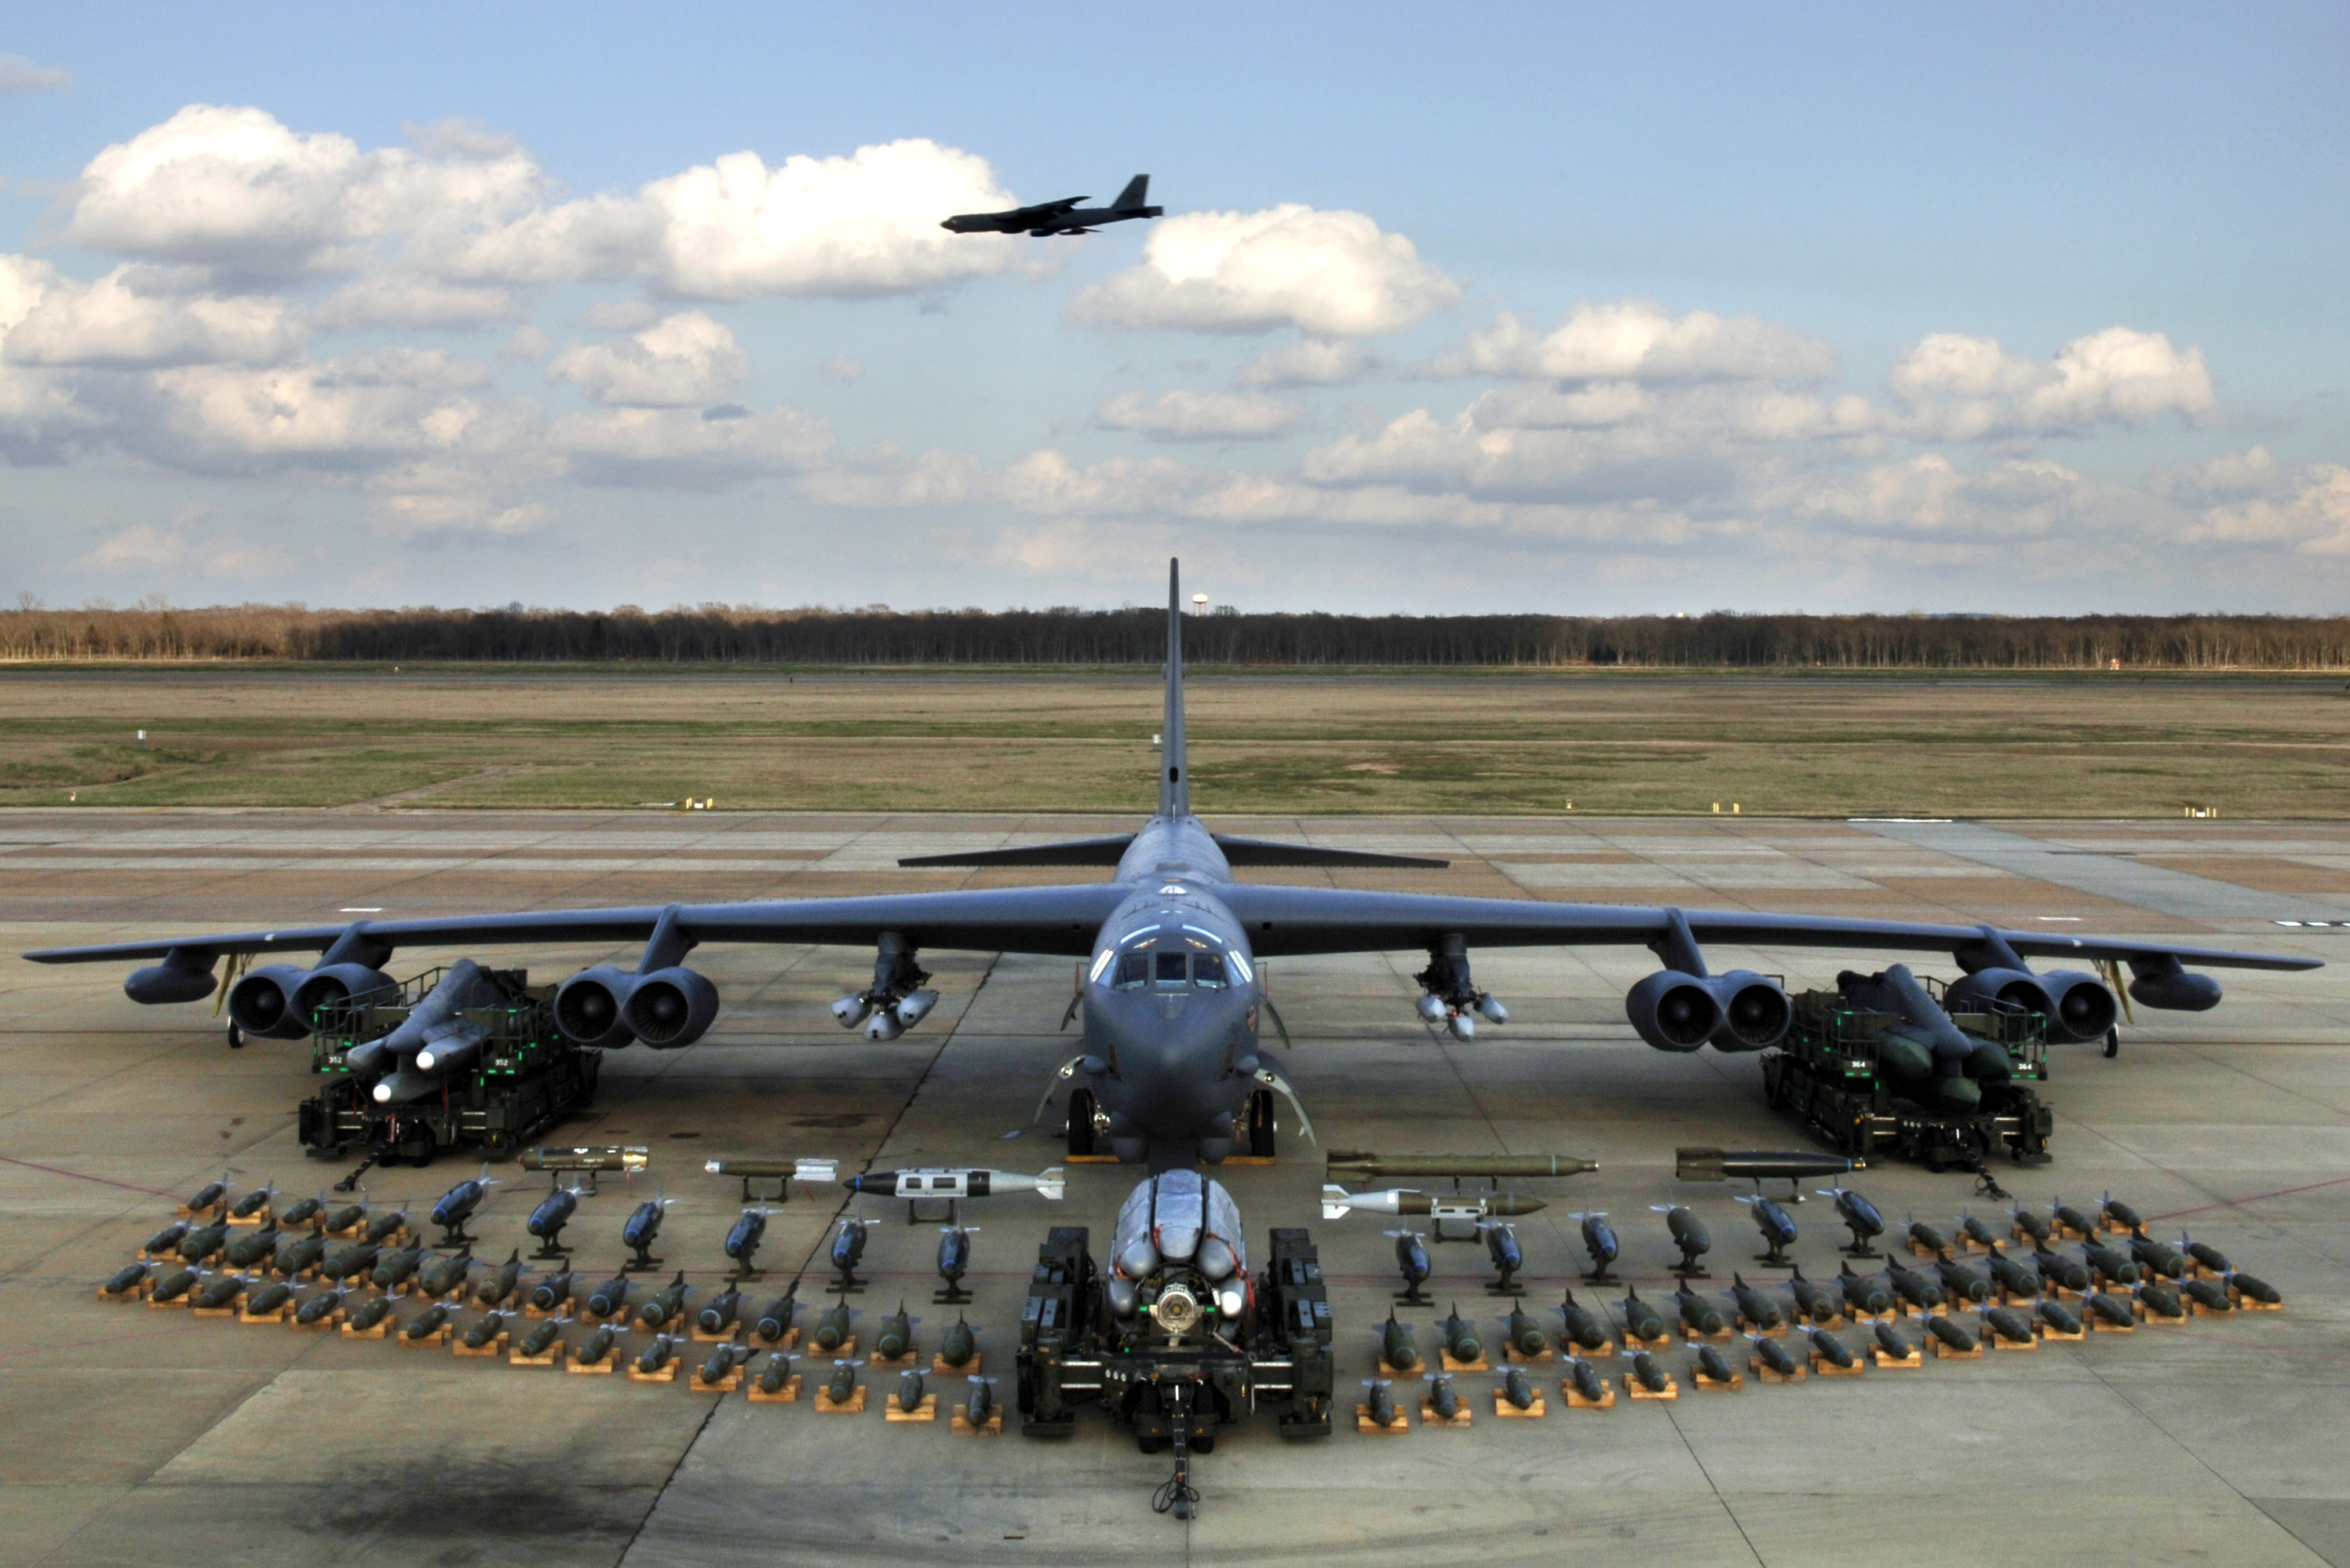 For the first time in history, the U.S. has placed B-52 Stratofortress nuclear bombers under NATO command